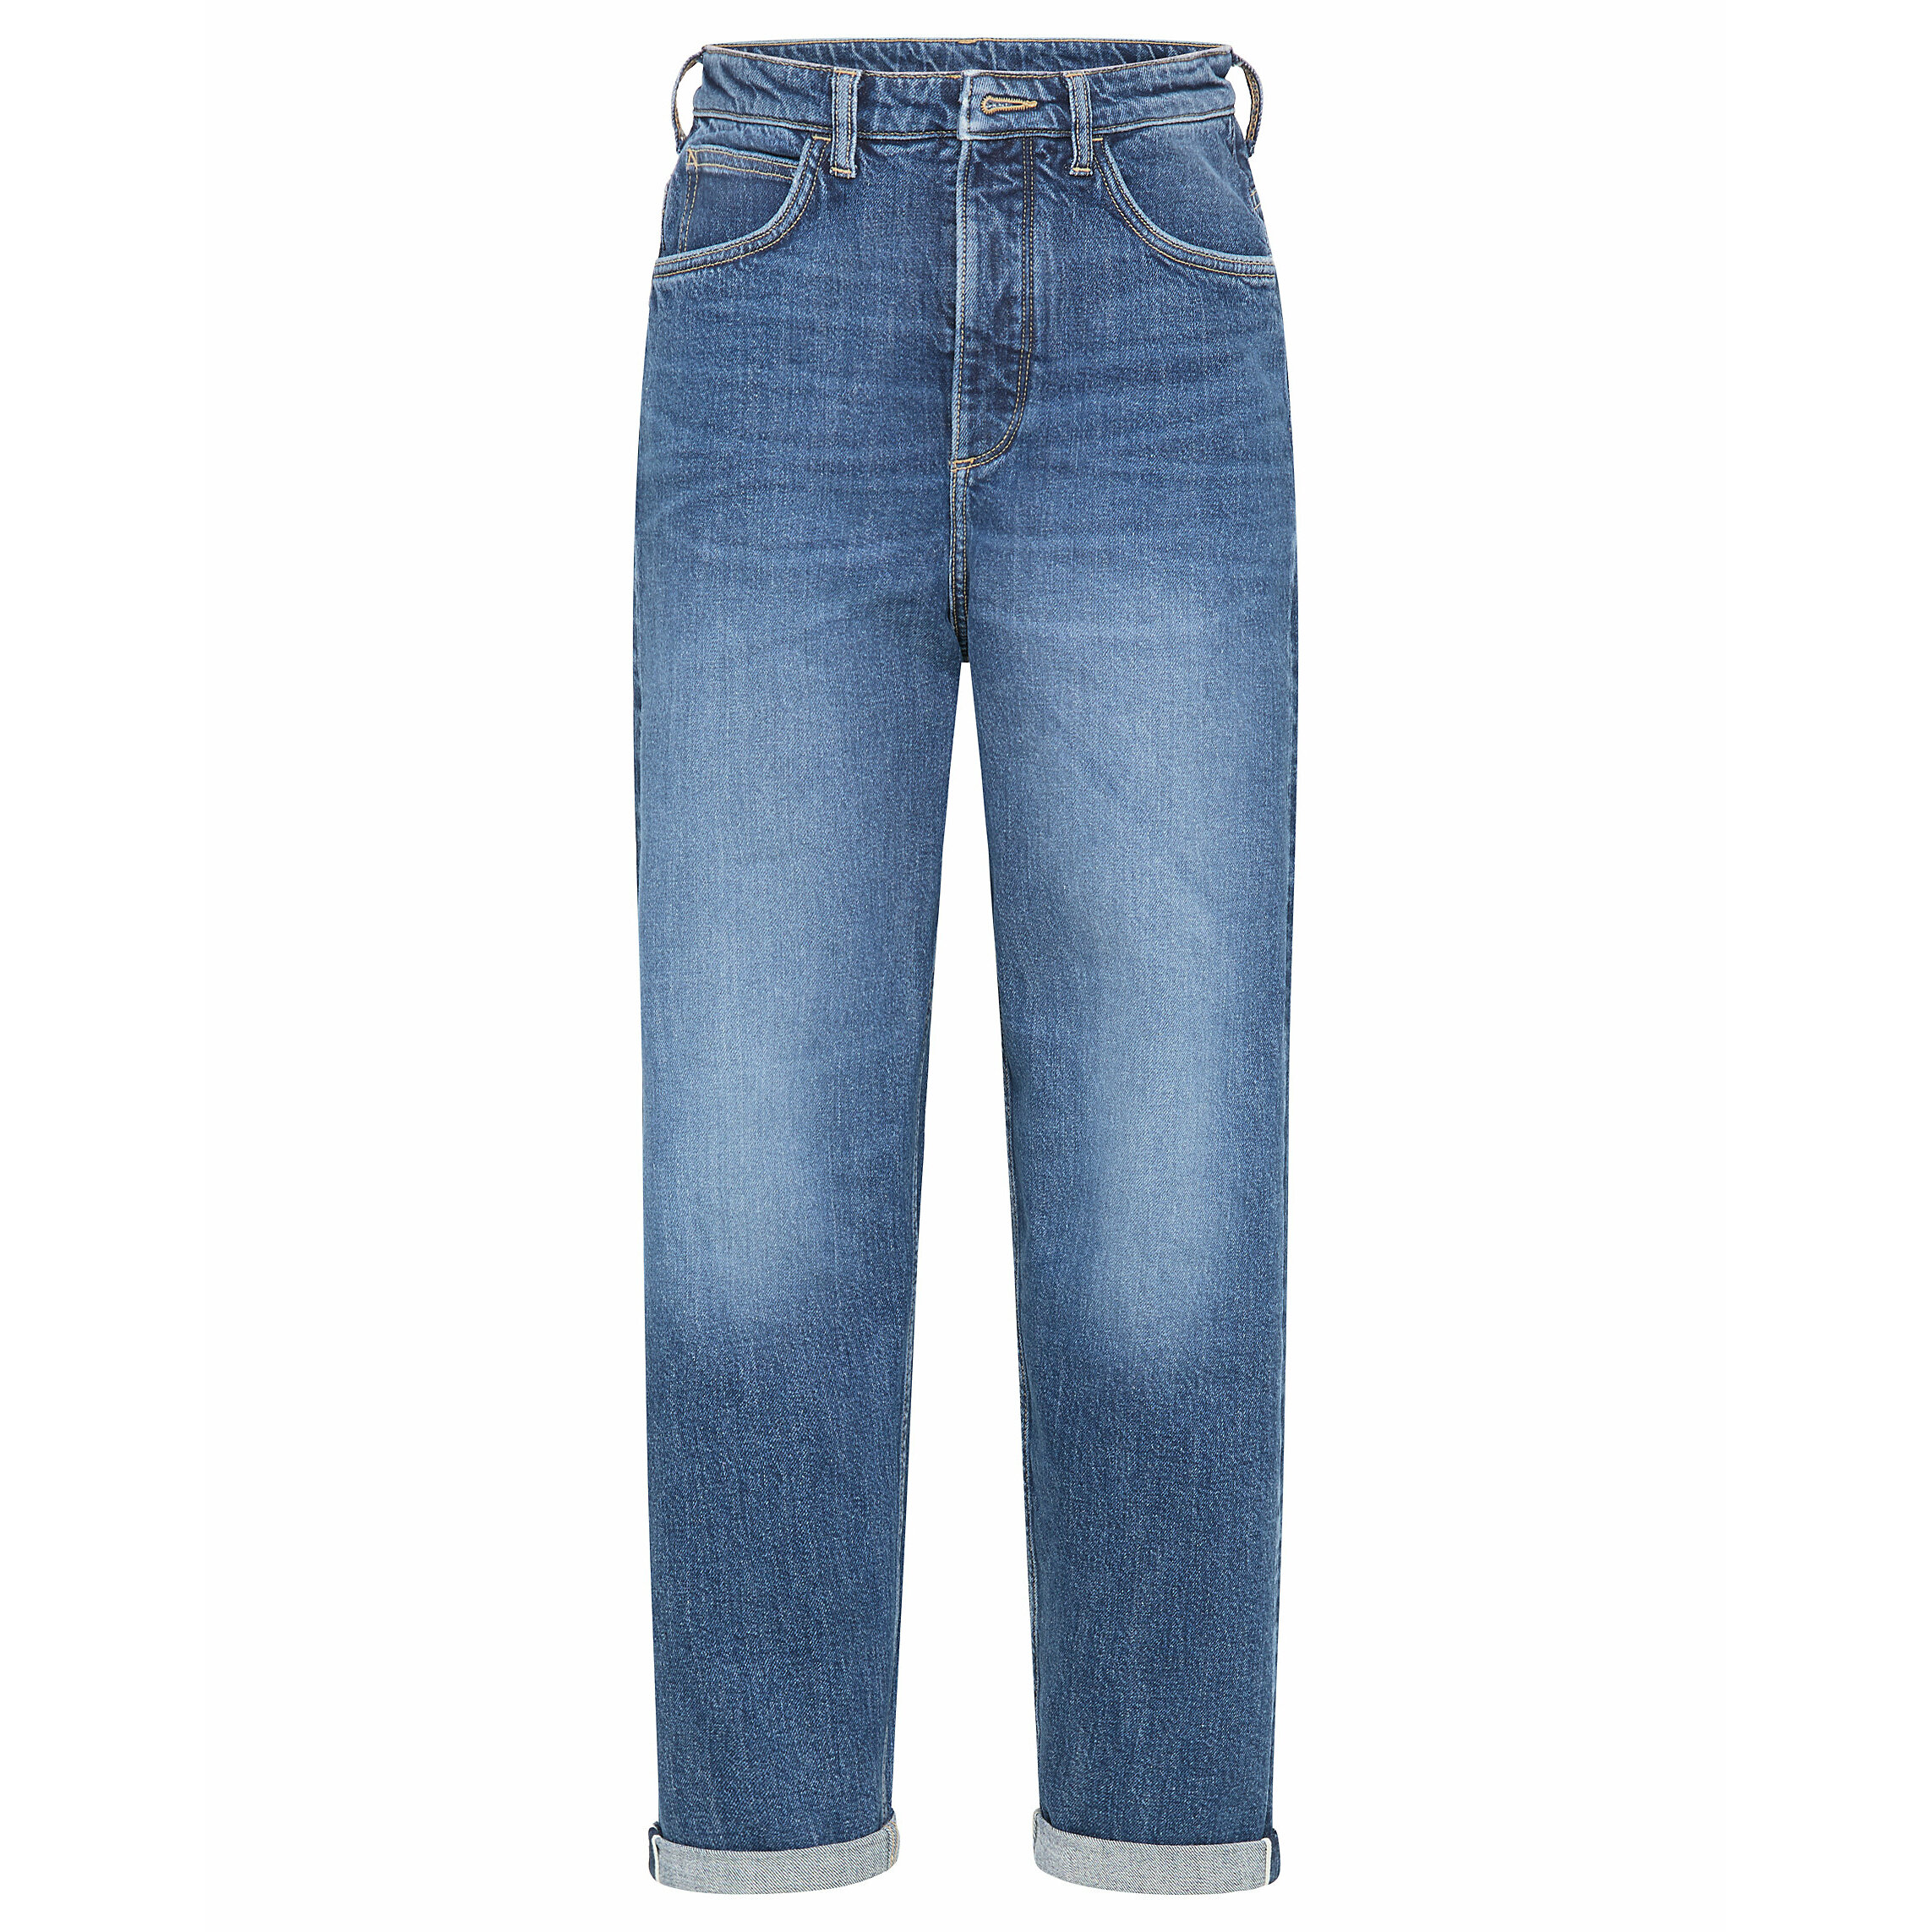 lee jeans carol button fly in mid newberry bleu